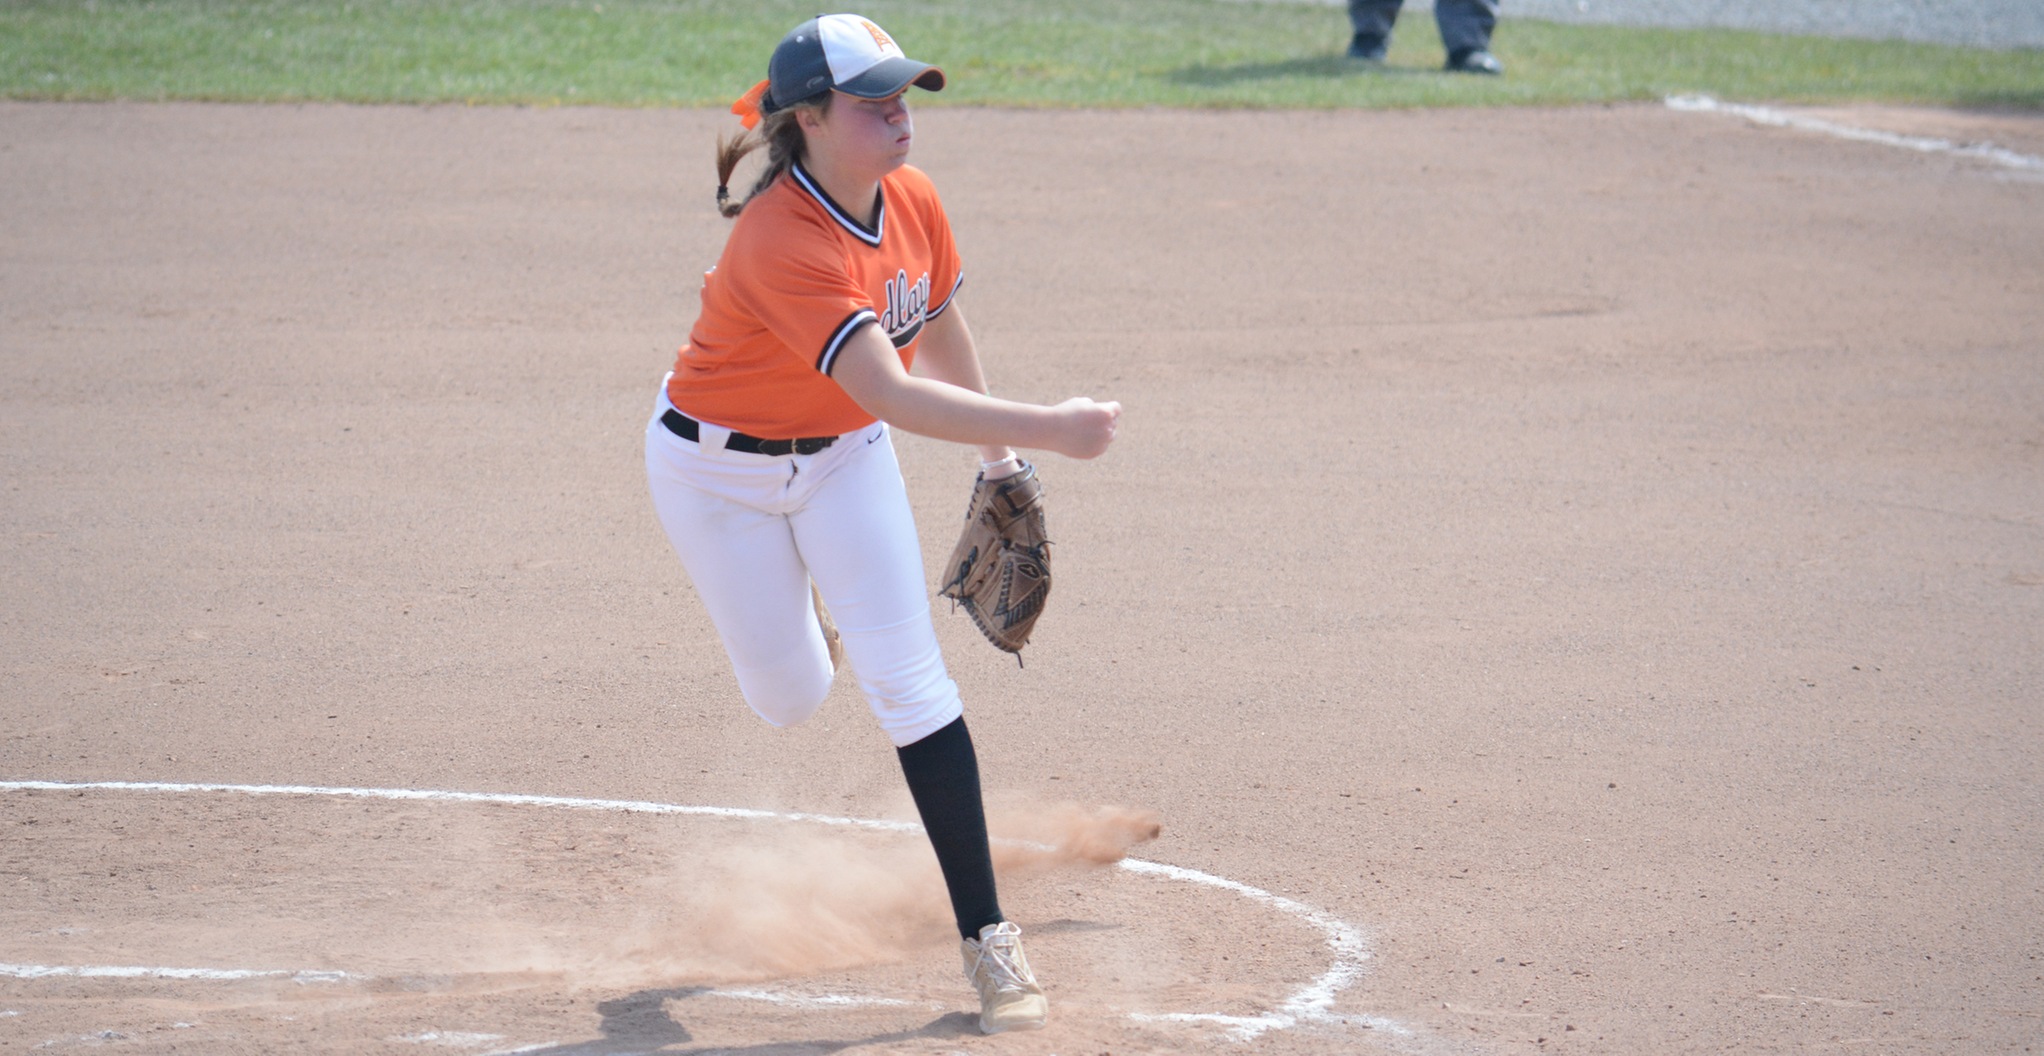 Oilers Softball Games for March 14 Canceled